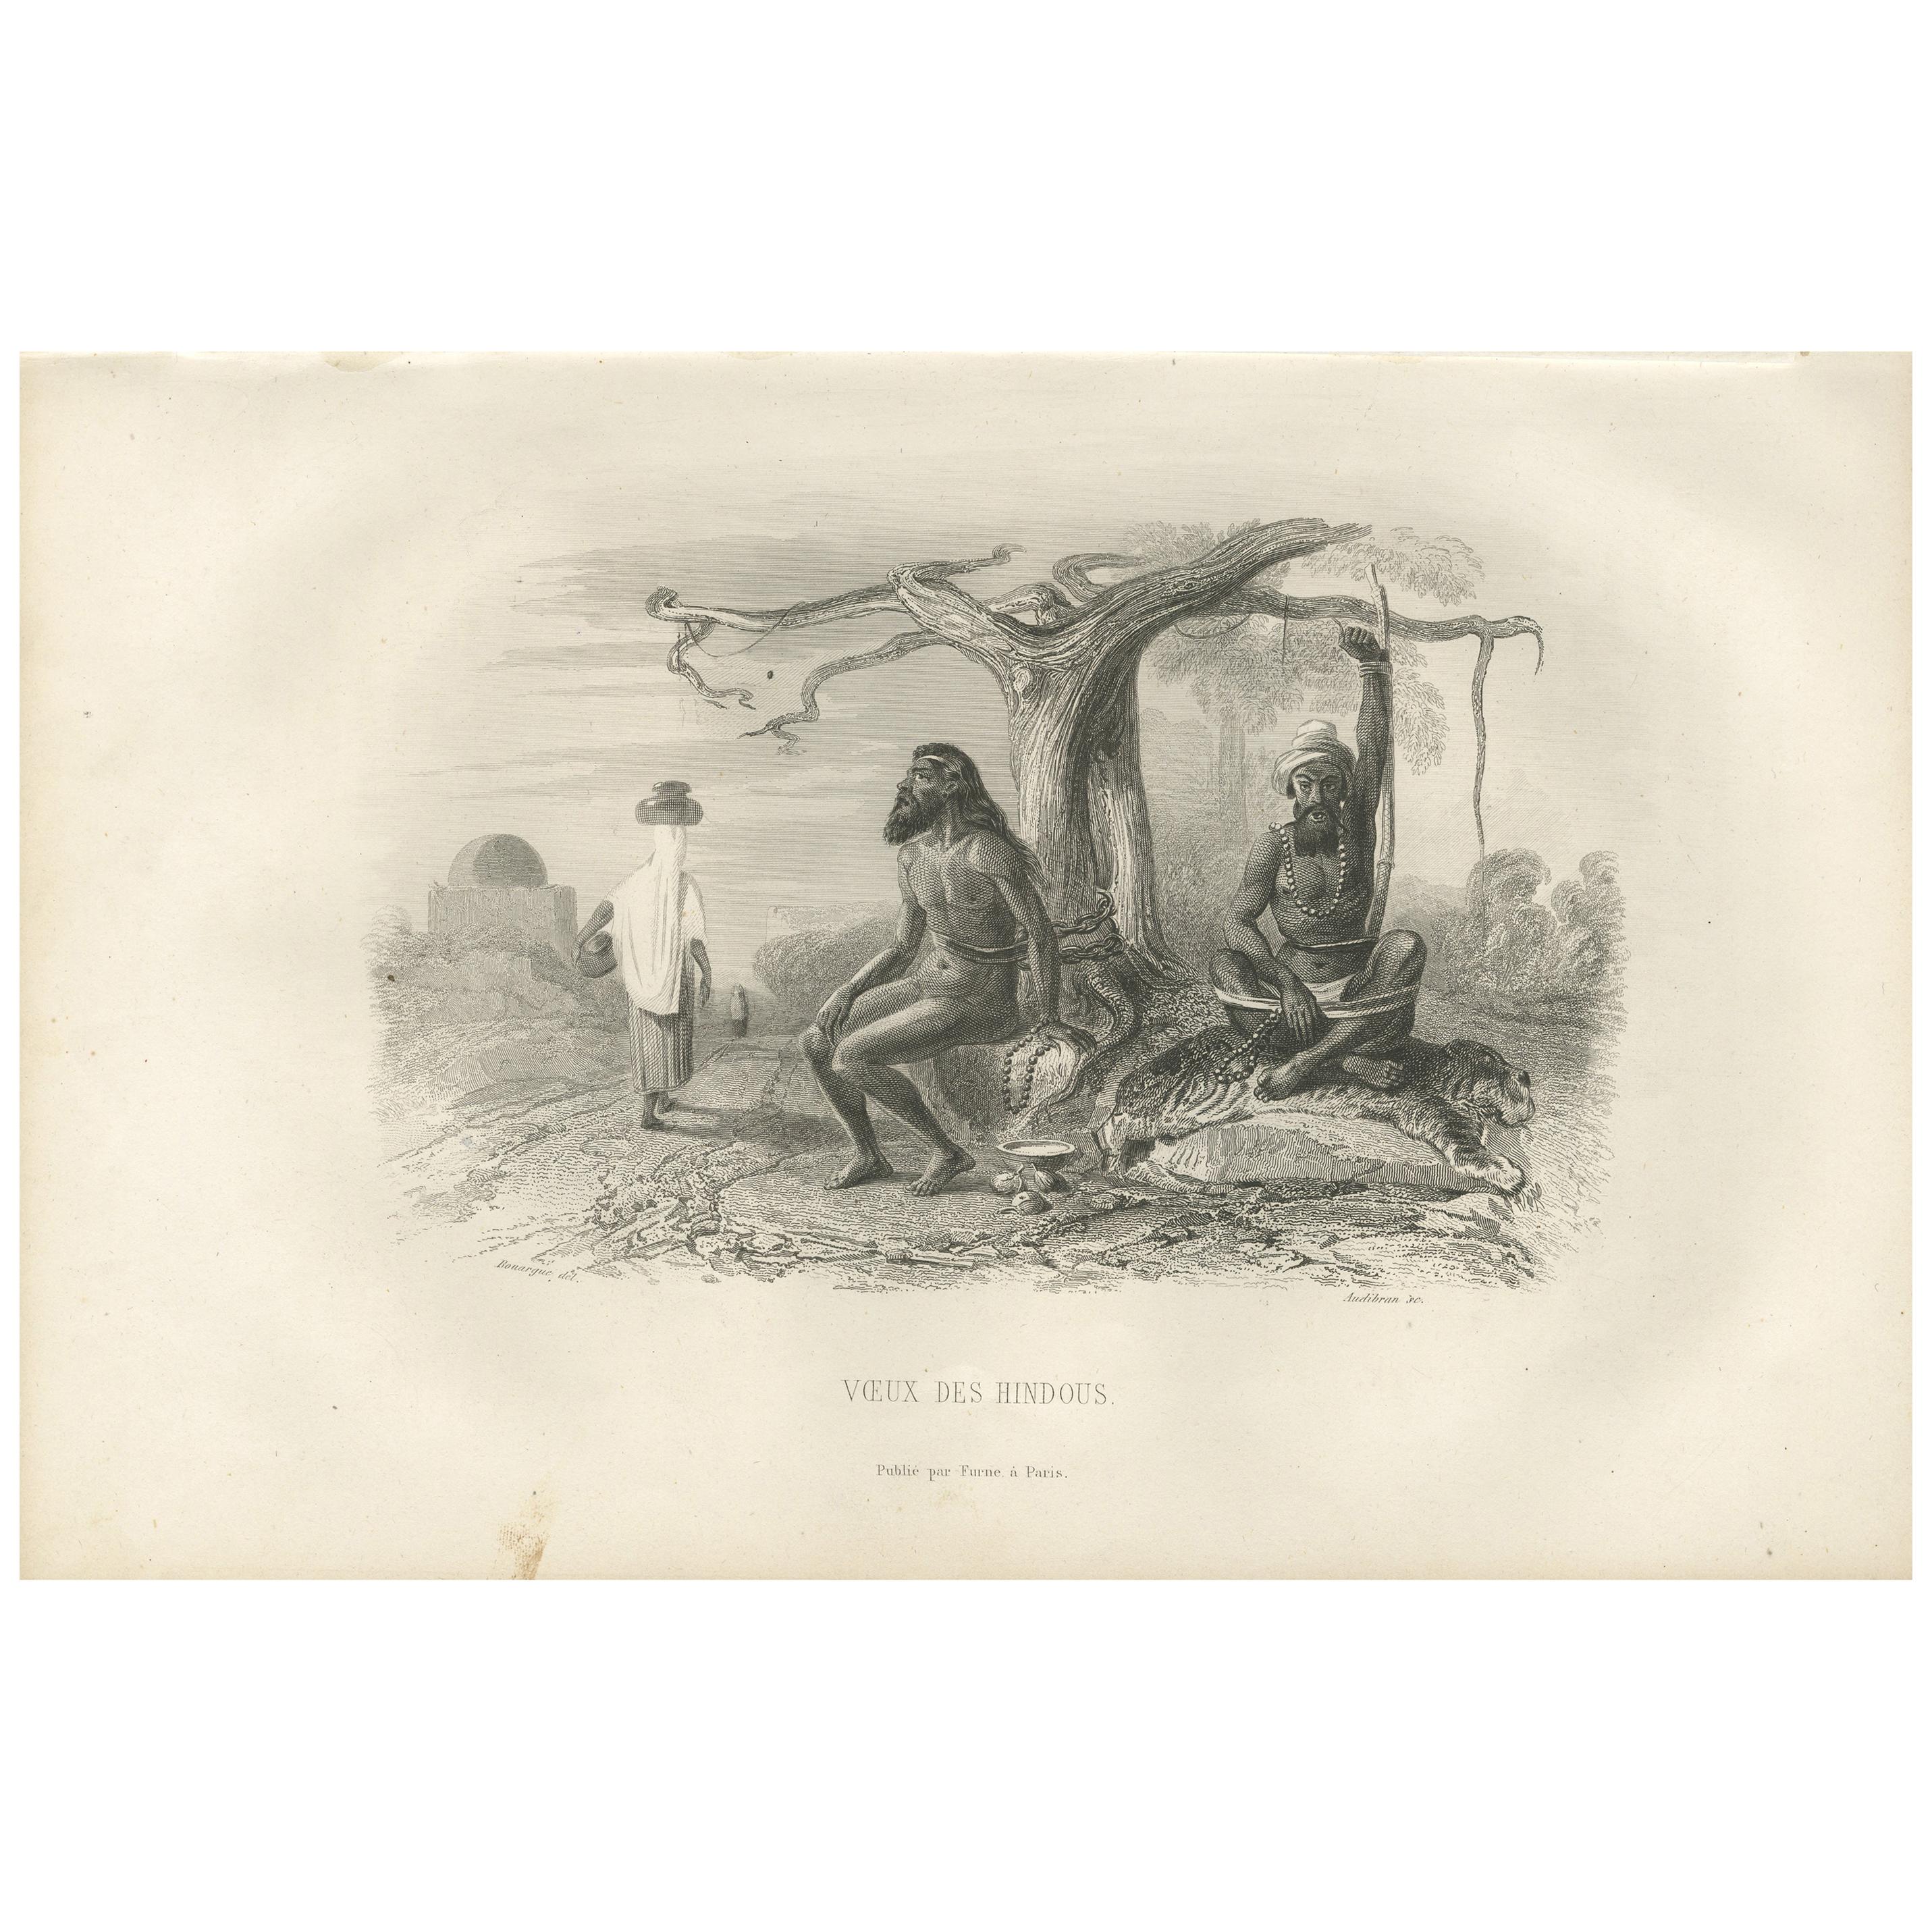 Antique Print of a Hindu Ritual by D'Urville, '1853'